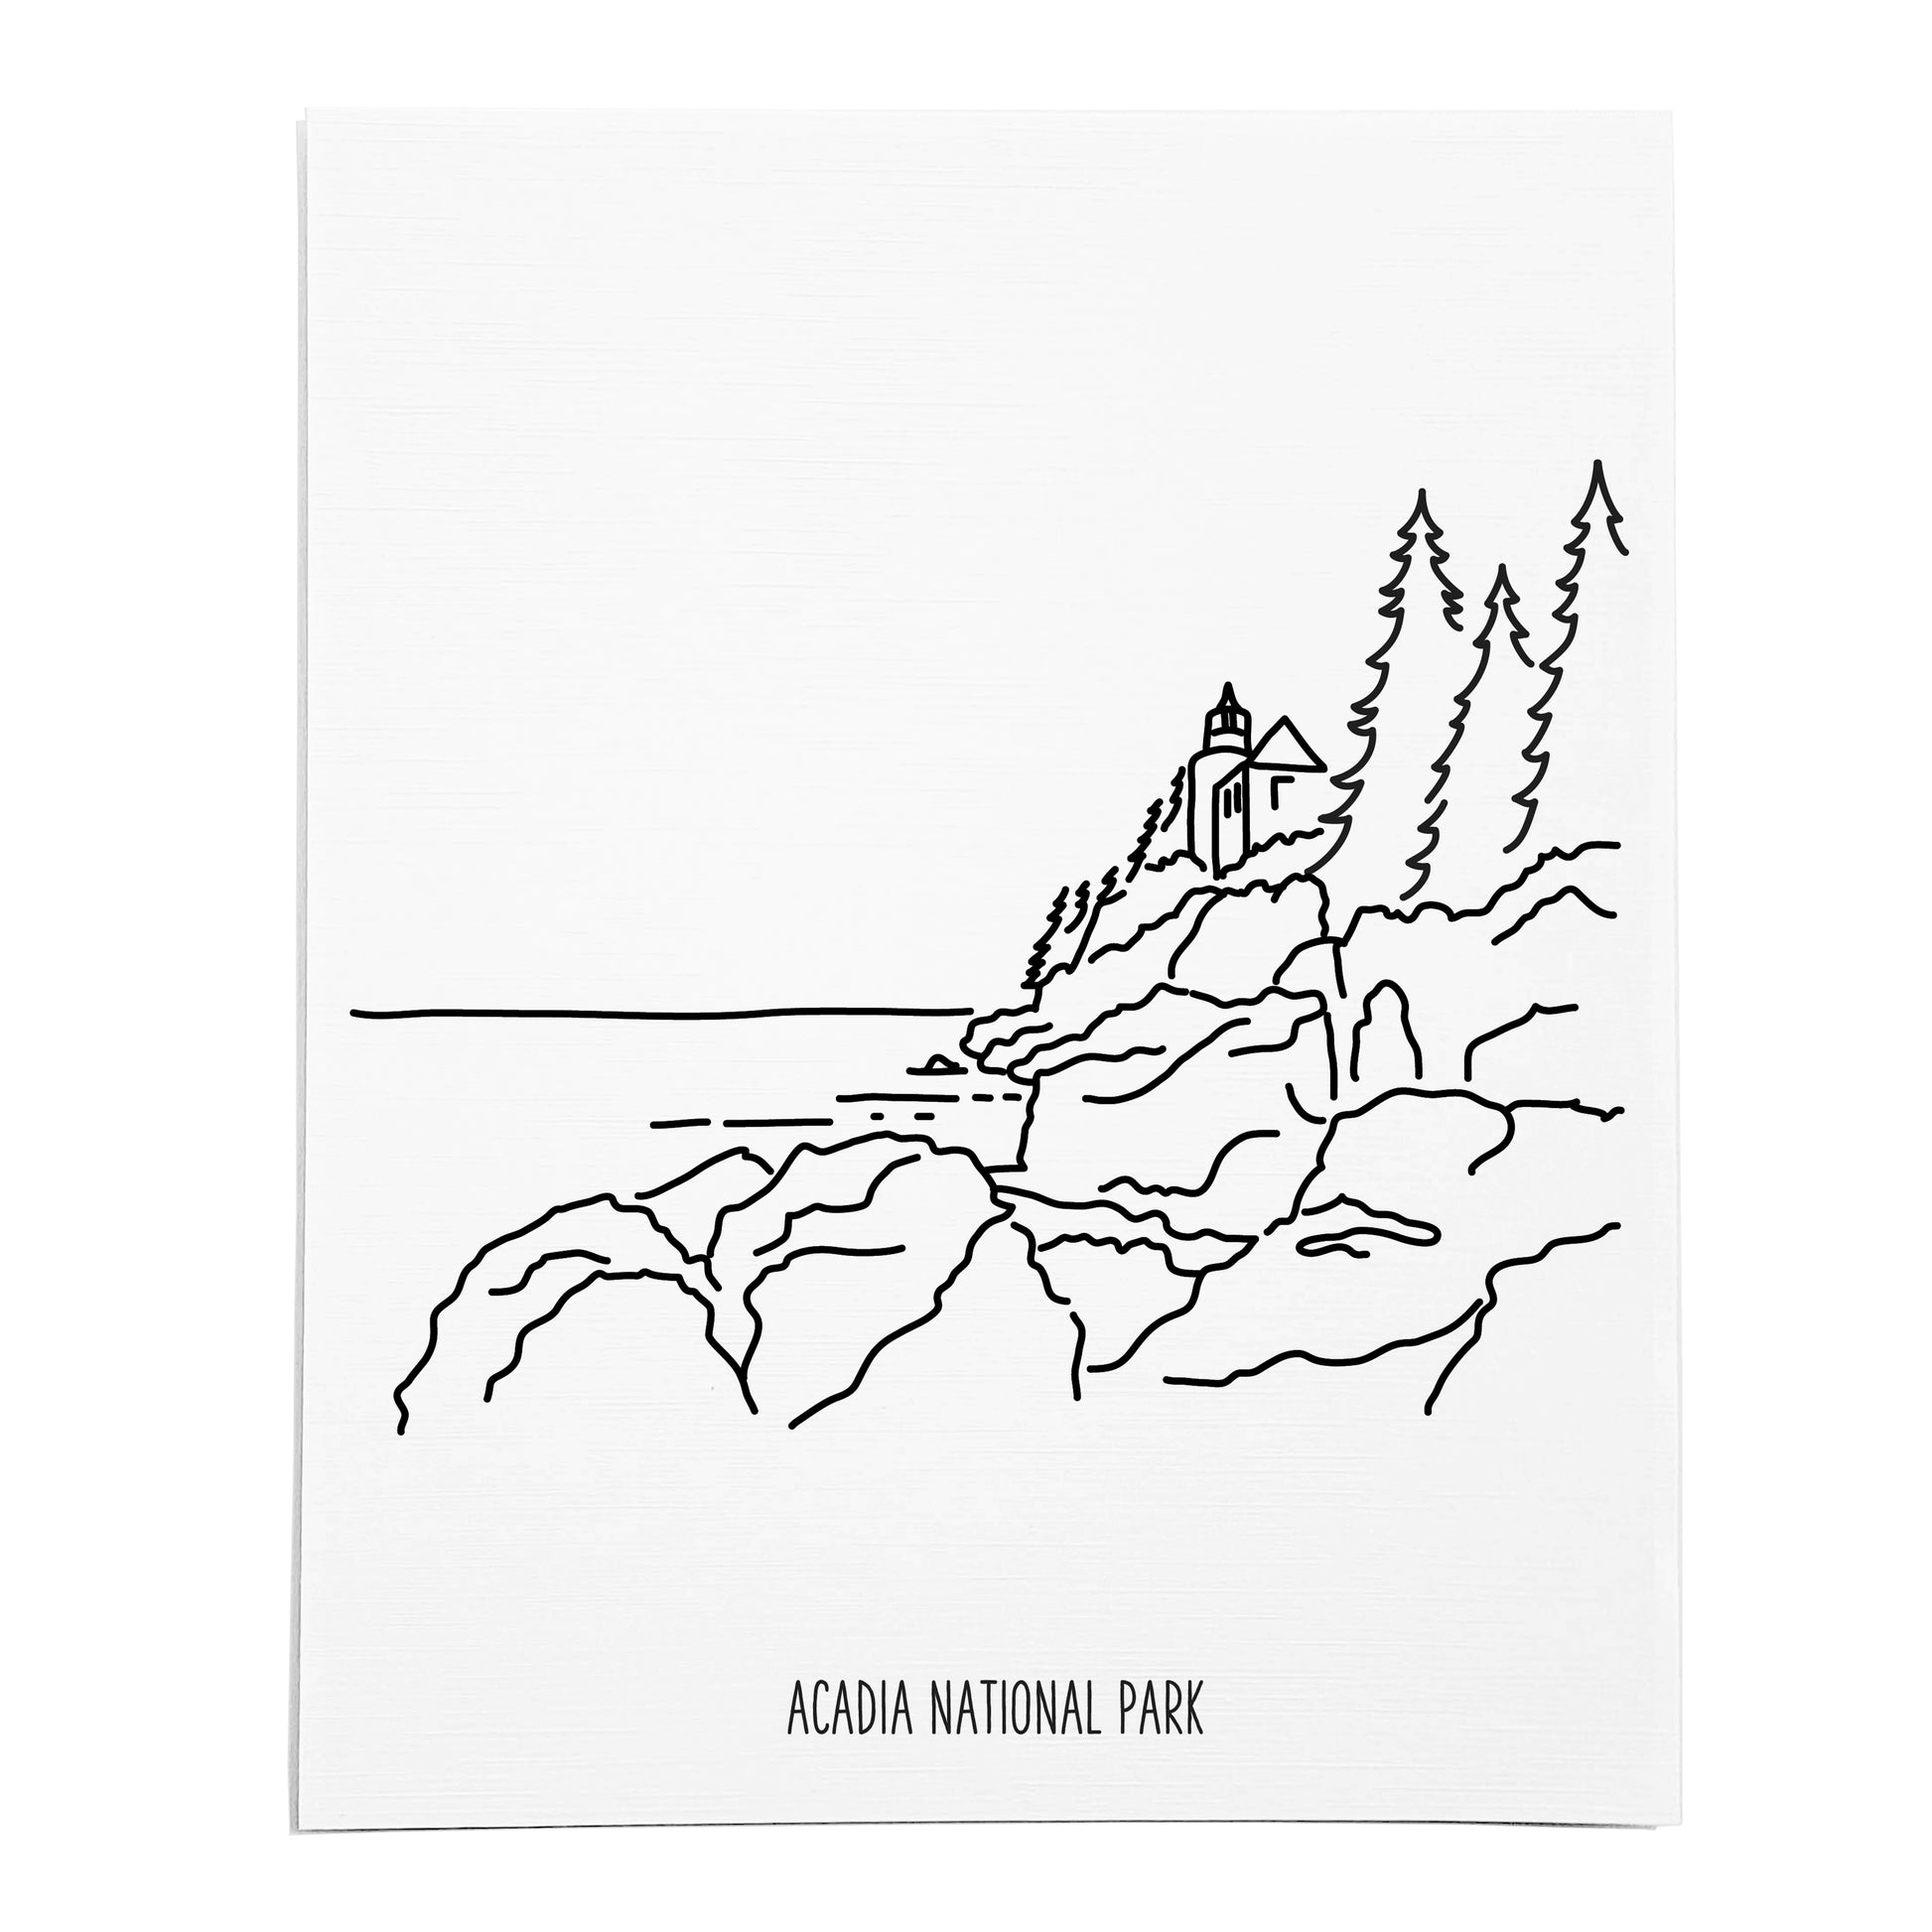 An art print featuring a line drawing of Acadia National Park on white linen paper